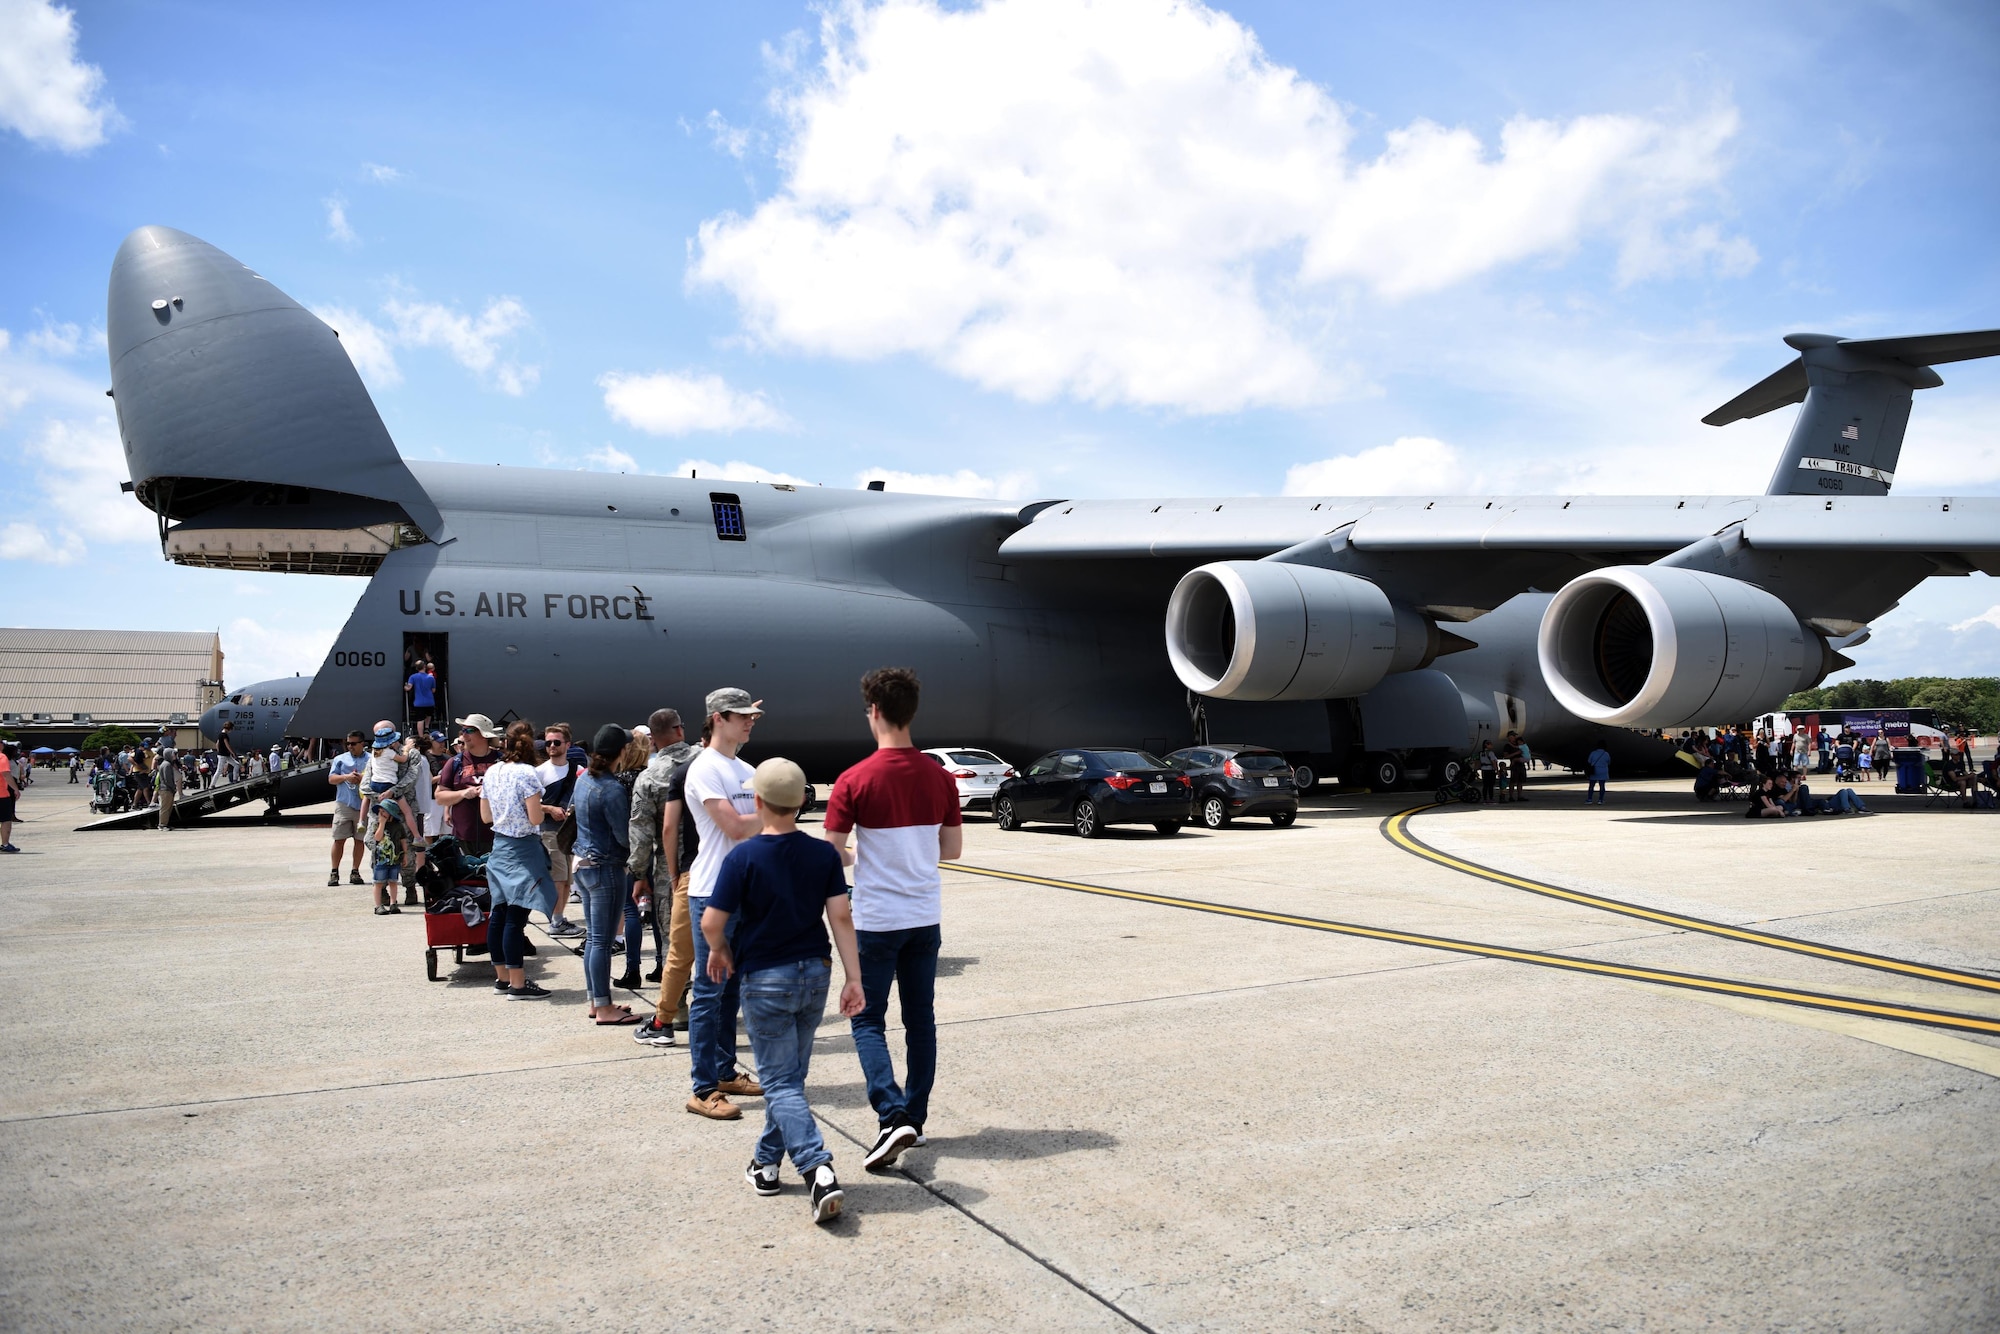 Spectators wait to explore the C-5 Galaxy at the Joint Base Andrews 2019 Air and Space Expo at Joint Base Andrews, Maryland, May 10, 2019. Displayed among aircraft like the T-38 Talon and C-5 Galaxy, the MQ-9 Reaper was the only Remotely Piloted Aircraft in attendance during this year’s airshow. (U.S. Air Force photo by Airman 1st Class Haley Stevens)